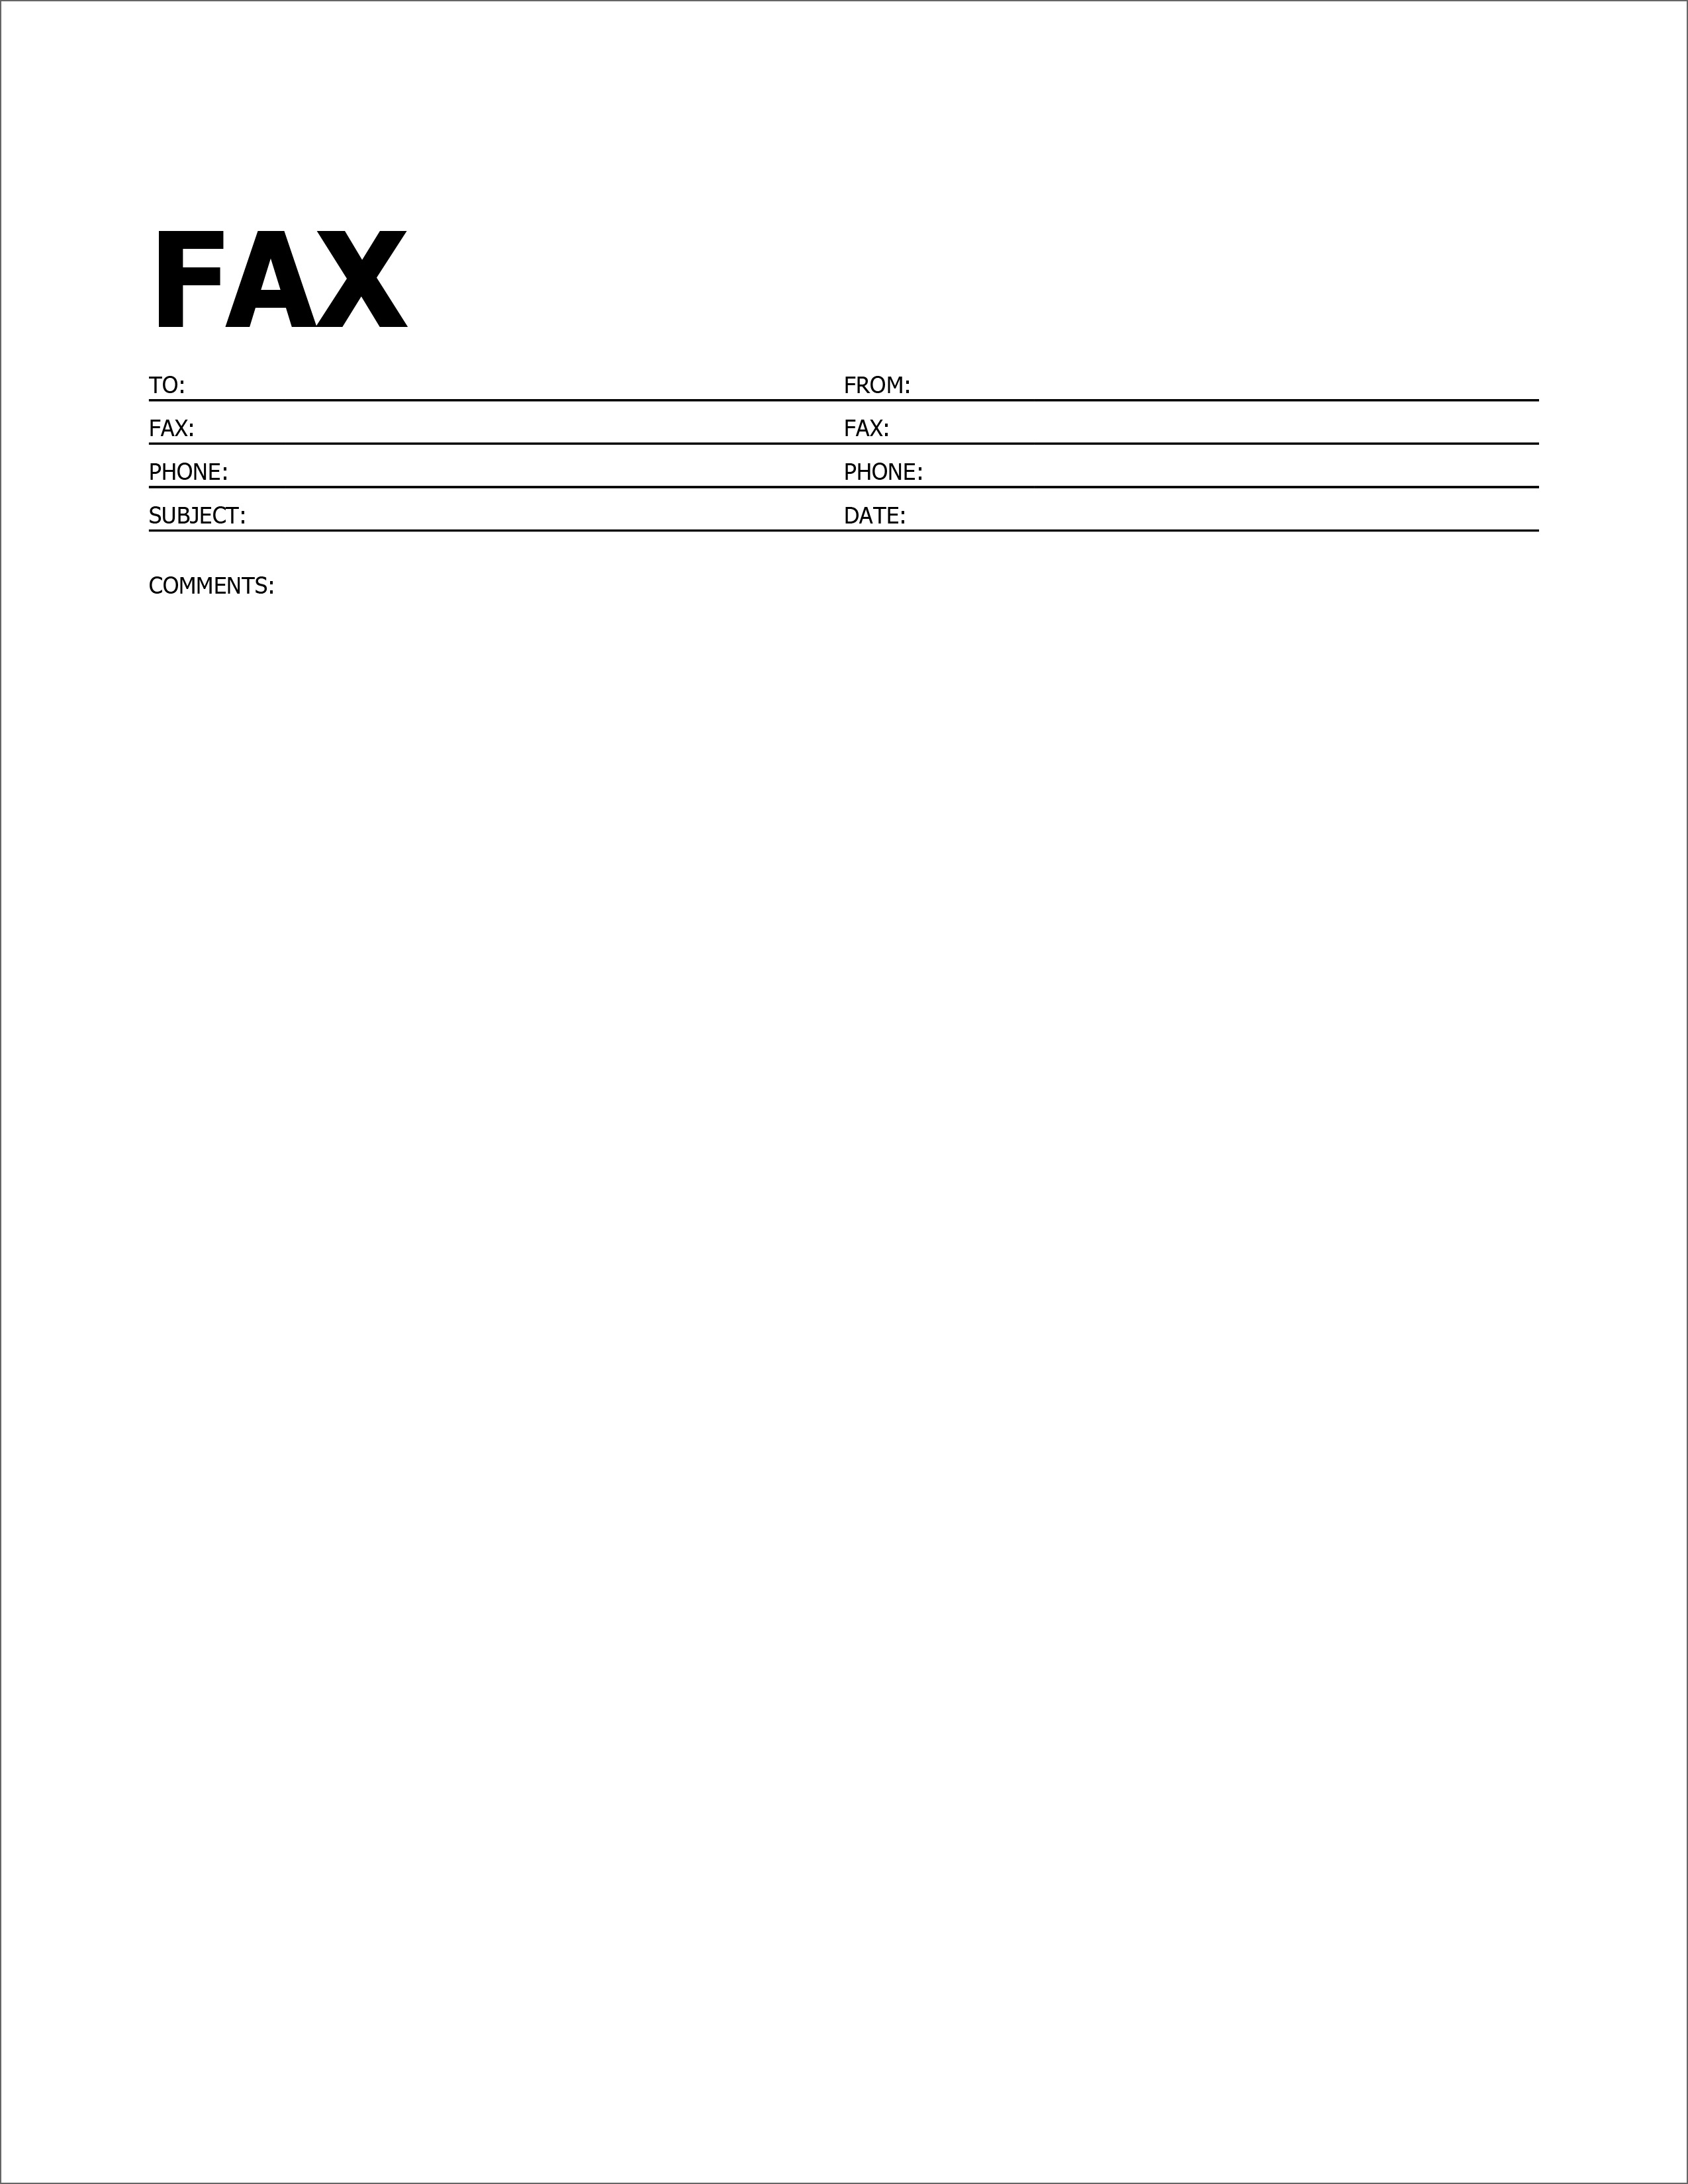 fax cover letters templates microsoft word